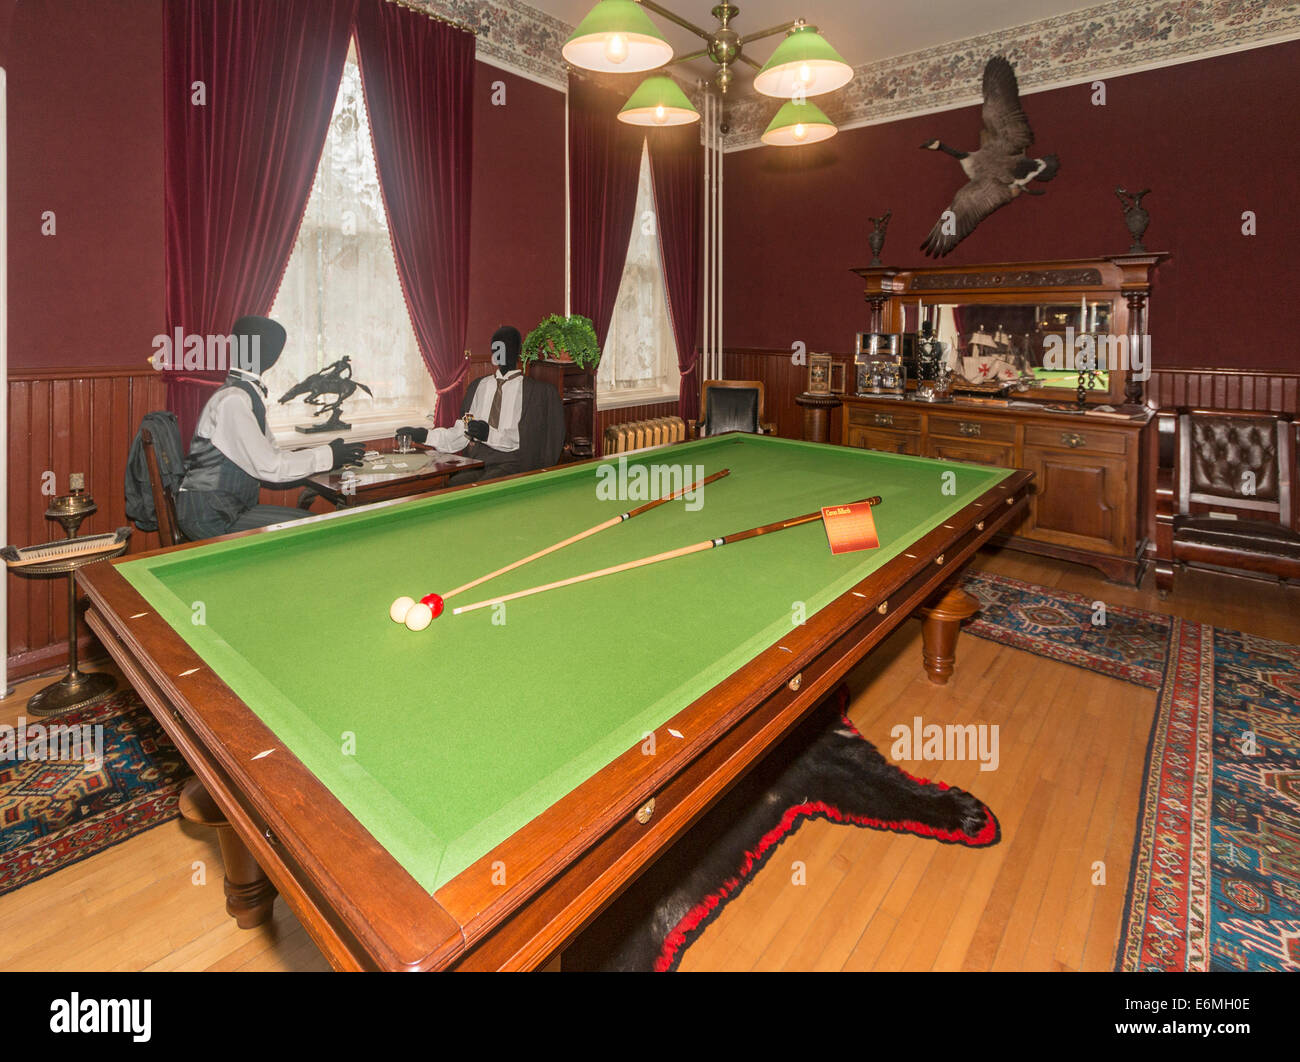 The Billiard Room High Resolution Stock Photography and Images - Alamy